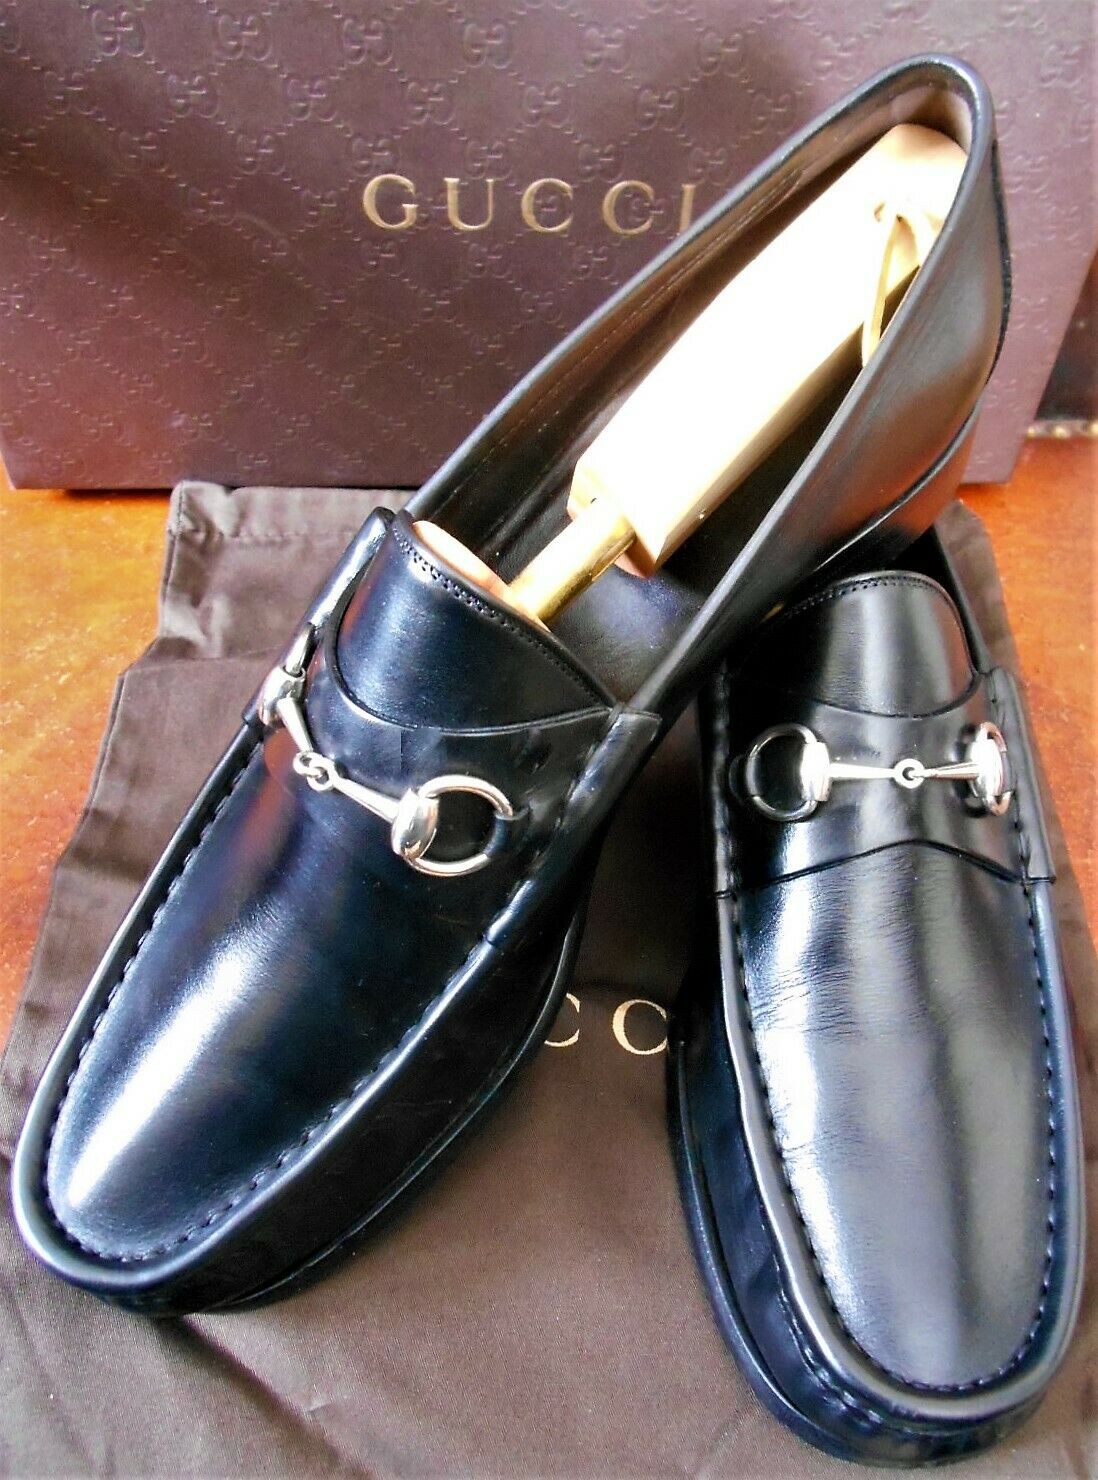 Gucci Black Horsebit Loafers Hand Made in Italy Size US 13D Authentic, Exc Cond.